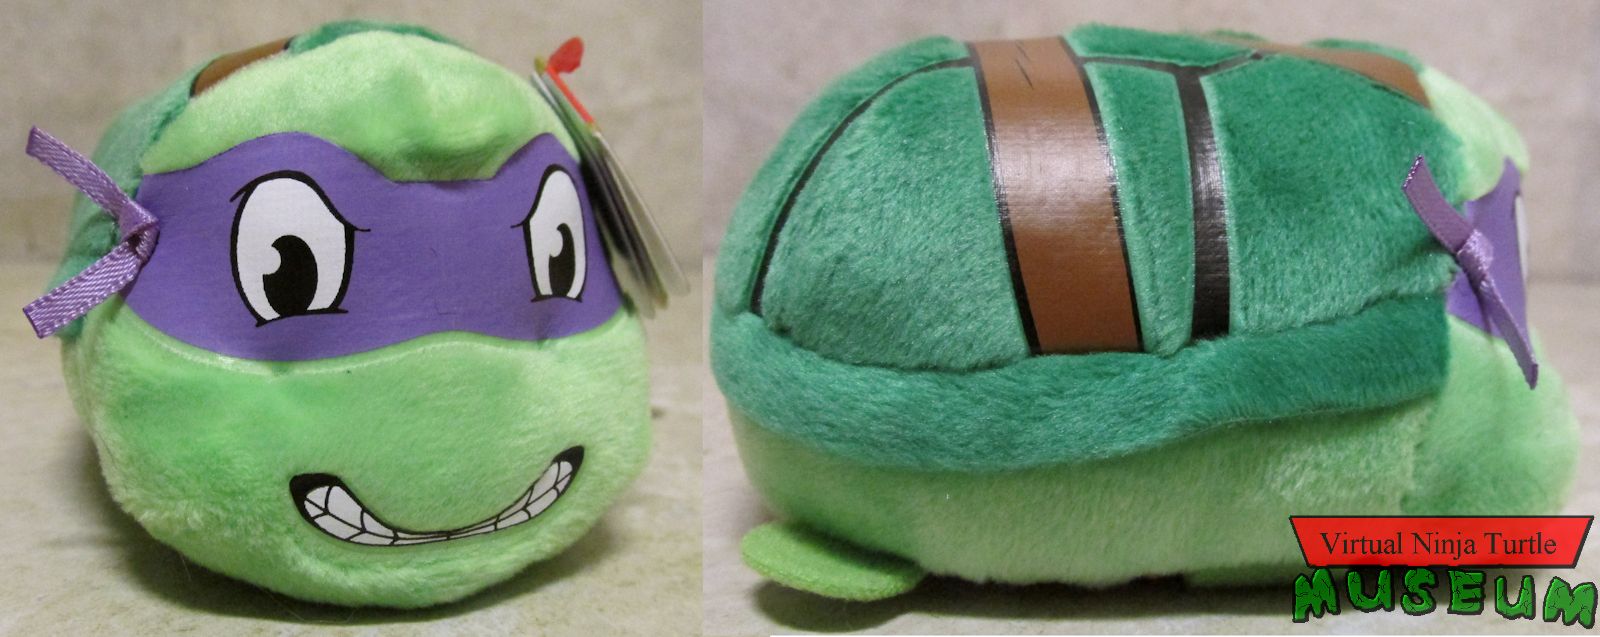 Donatello Teeny Ty front and side